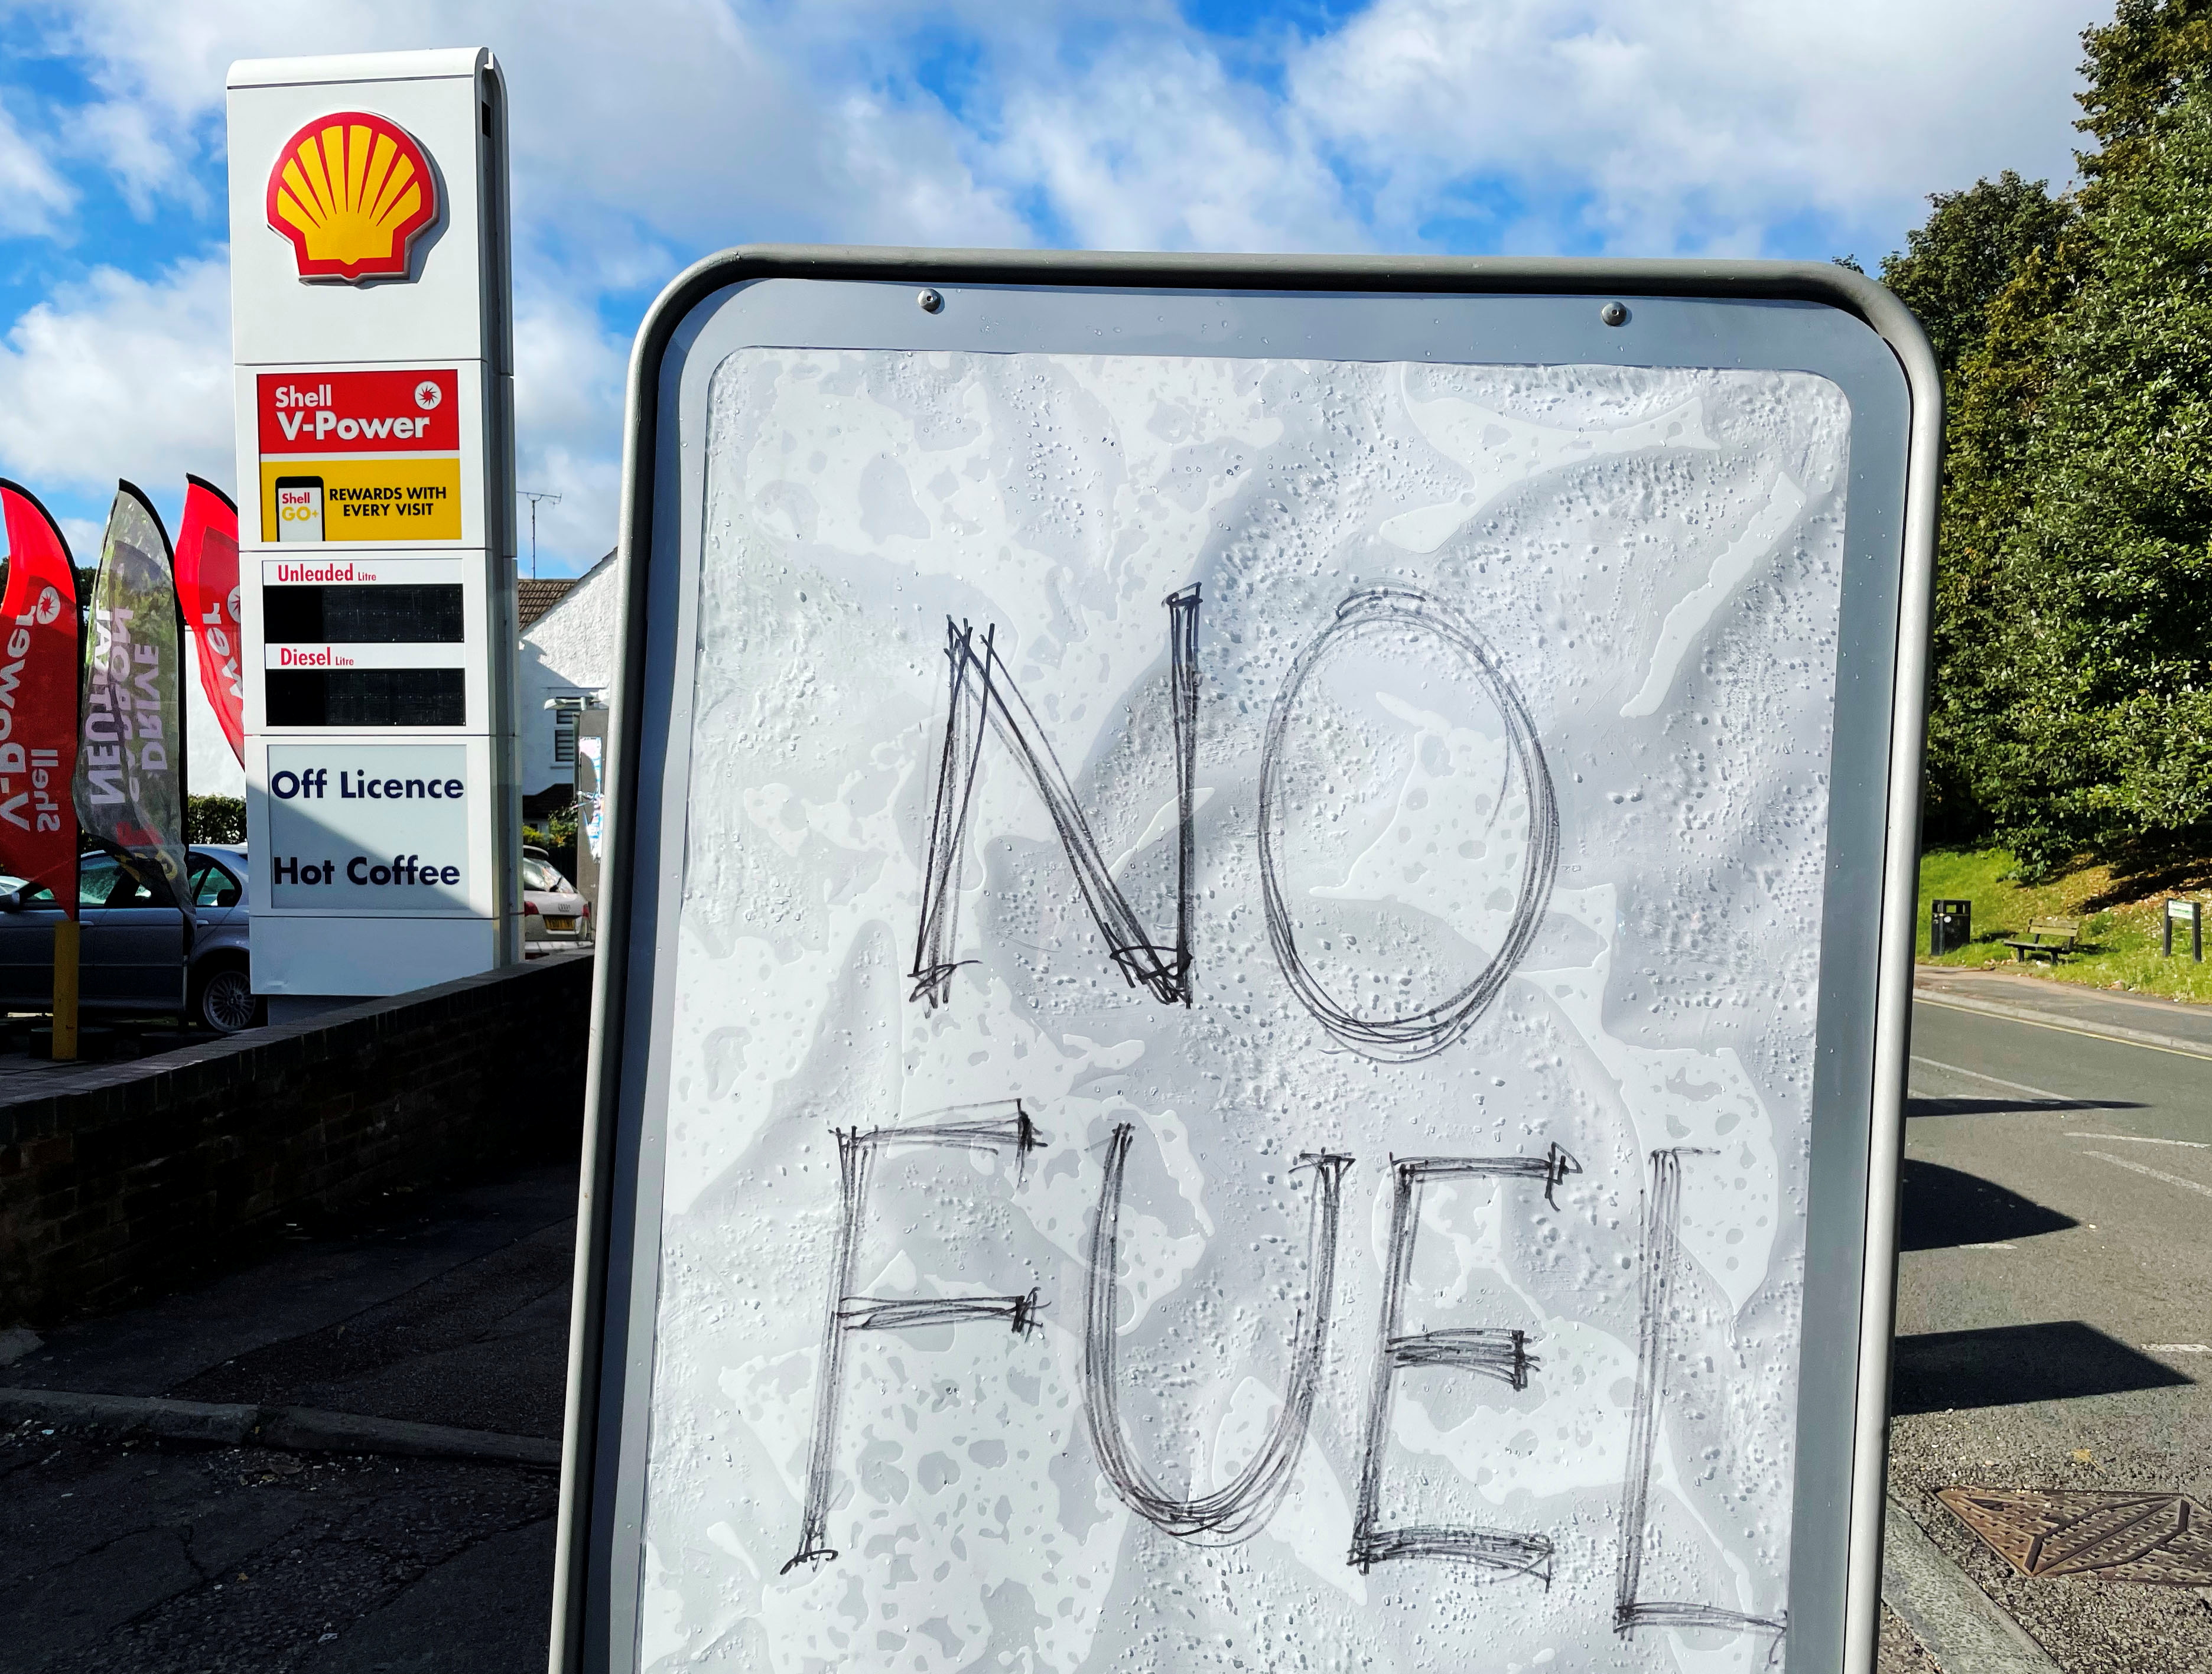 A sign showing customers that fuel has run out is pictured at a petrol station in Hemel Hempstead, Britain, September 29, 2021. REUTERS/Matthew Childs